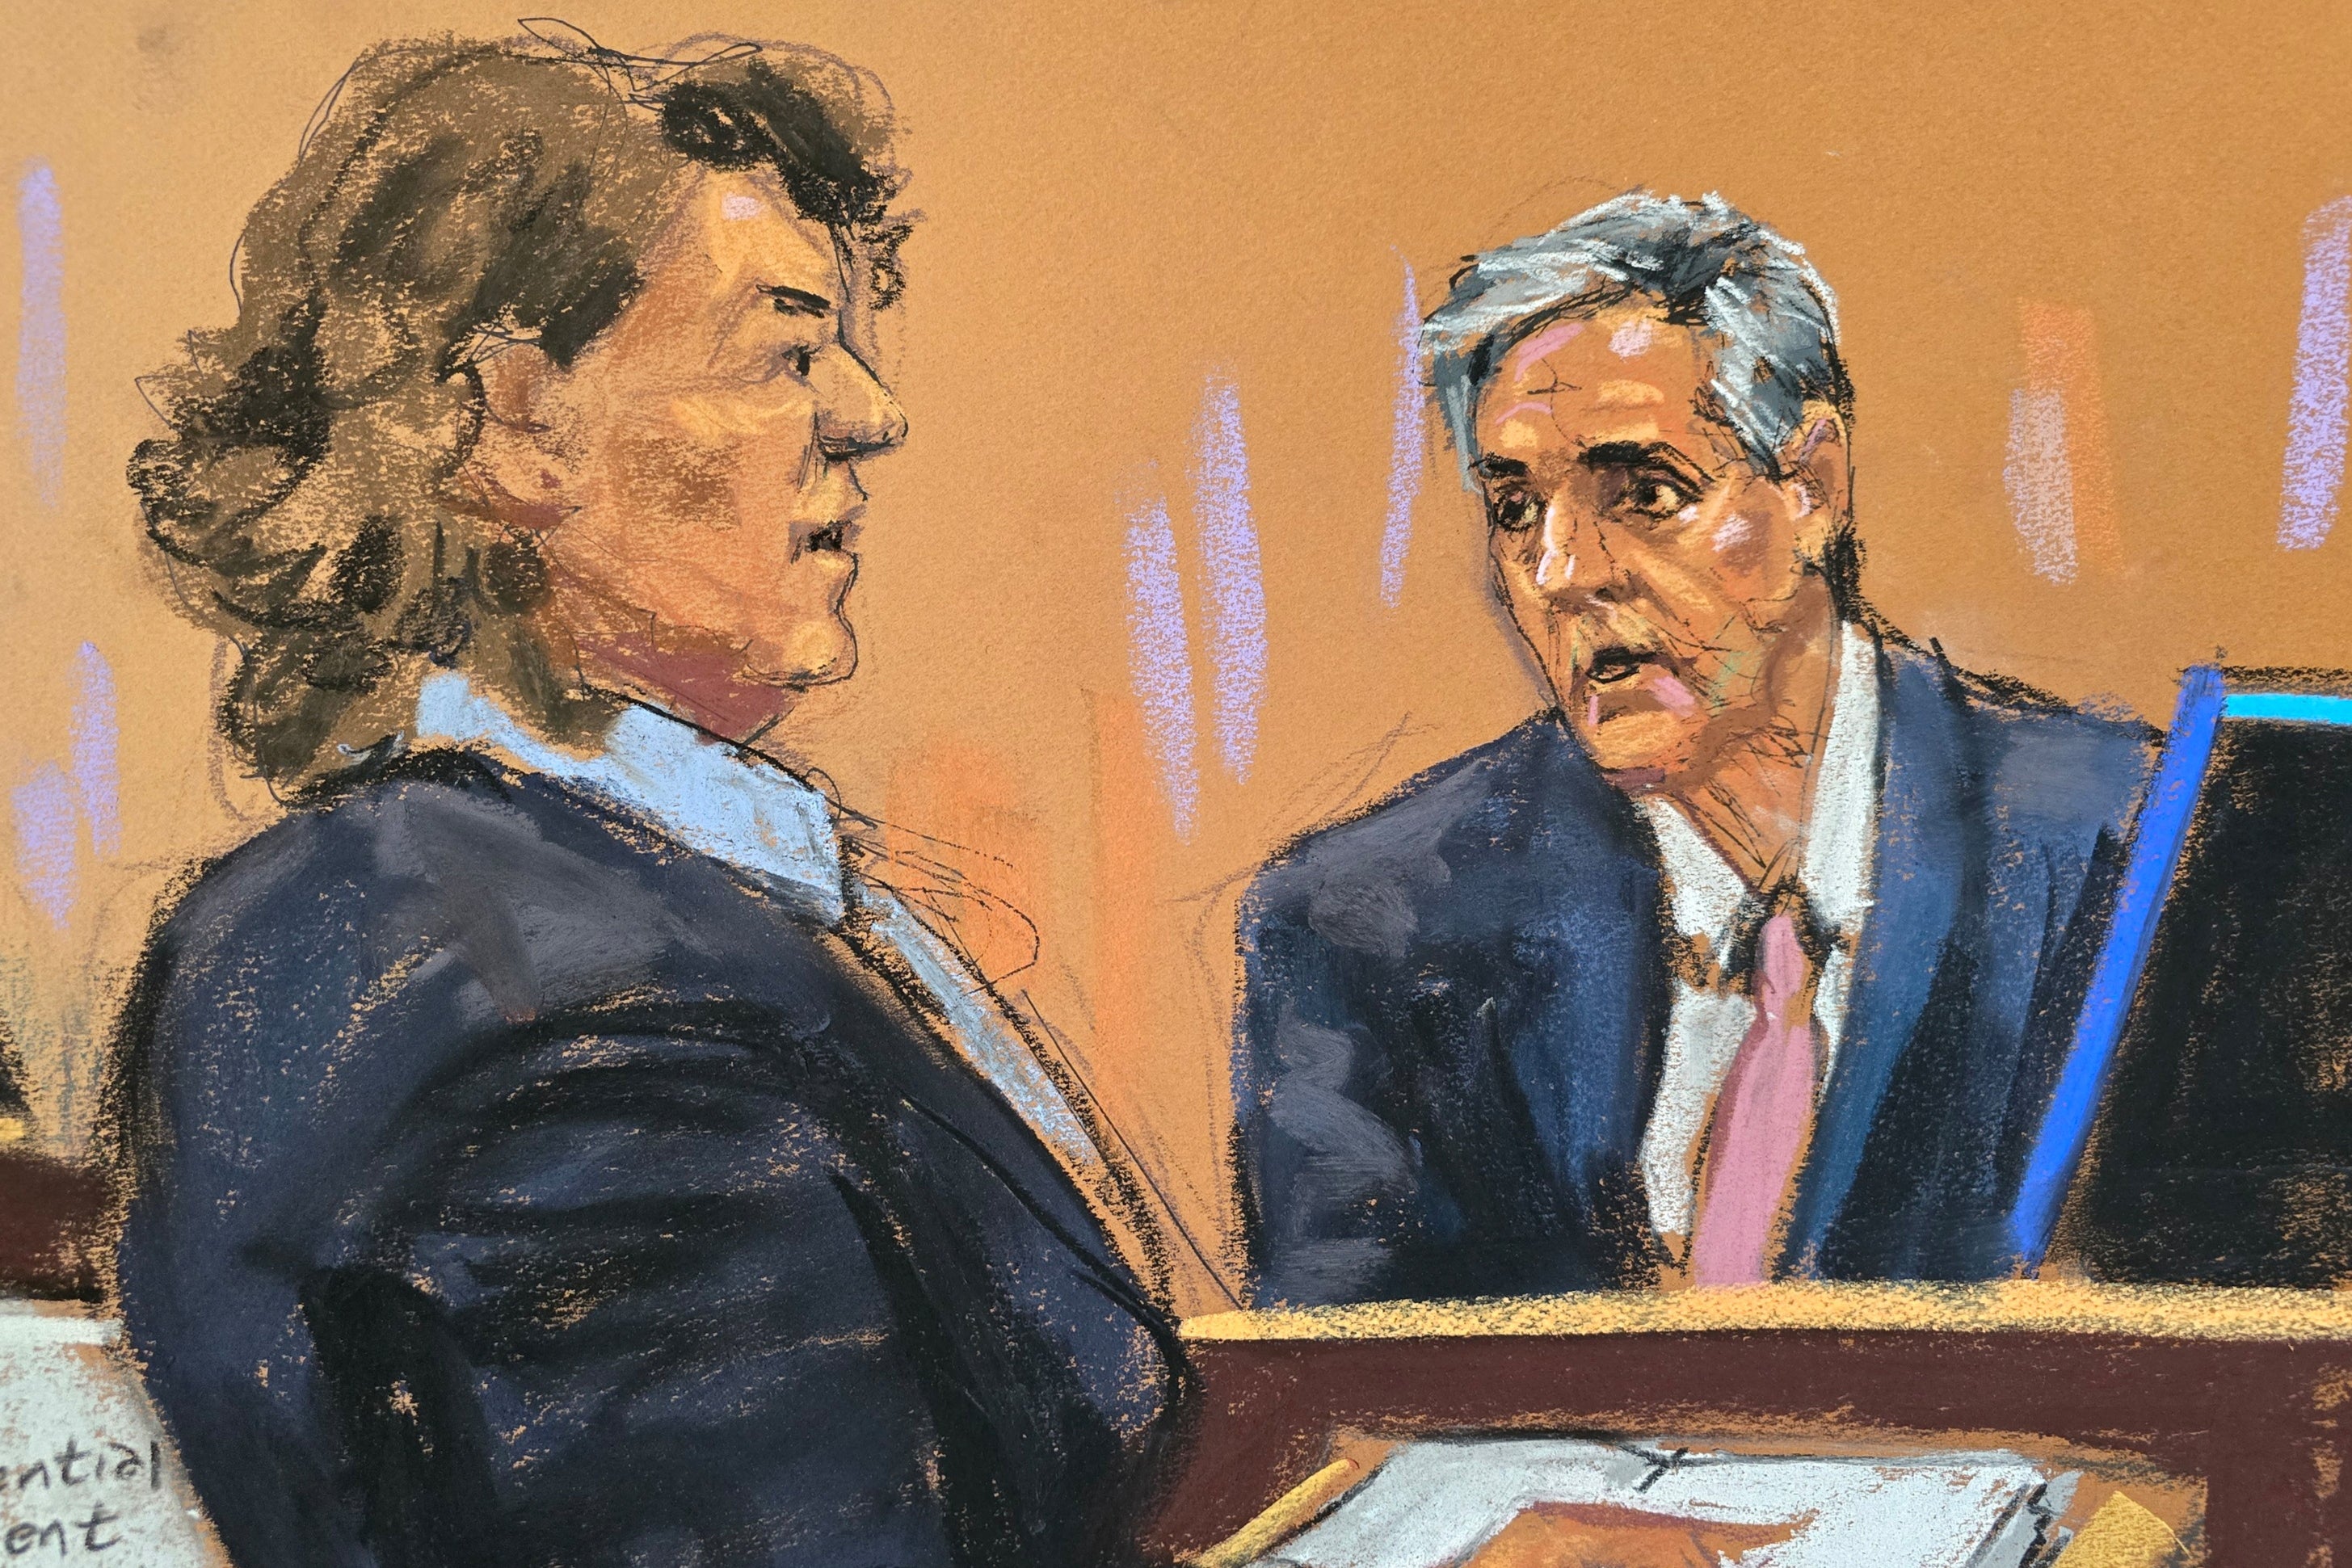 Micheal Cohen is questioned by prosecutor Susan Hoffinger on 13 May